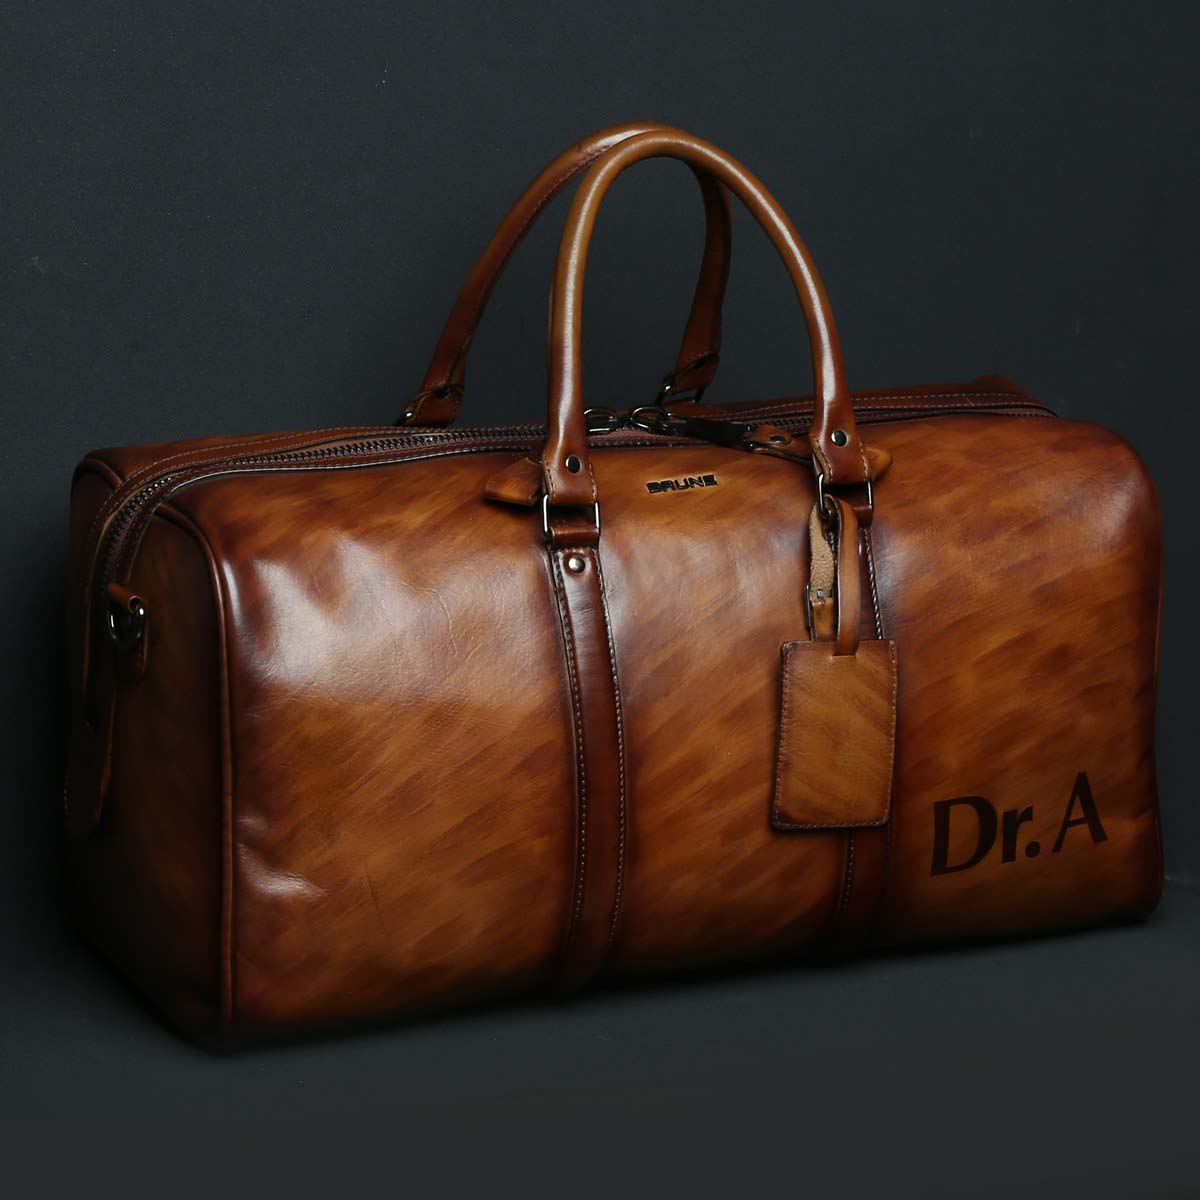 Customized Tan Leather Duffle Bag with Hand painted Your Name Initials by Brune & Bareskin